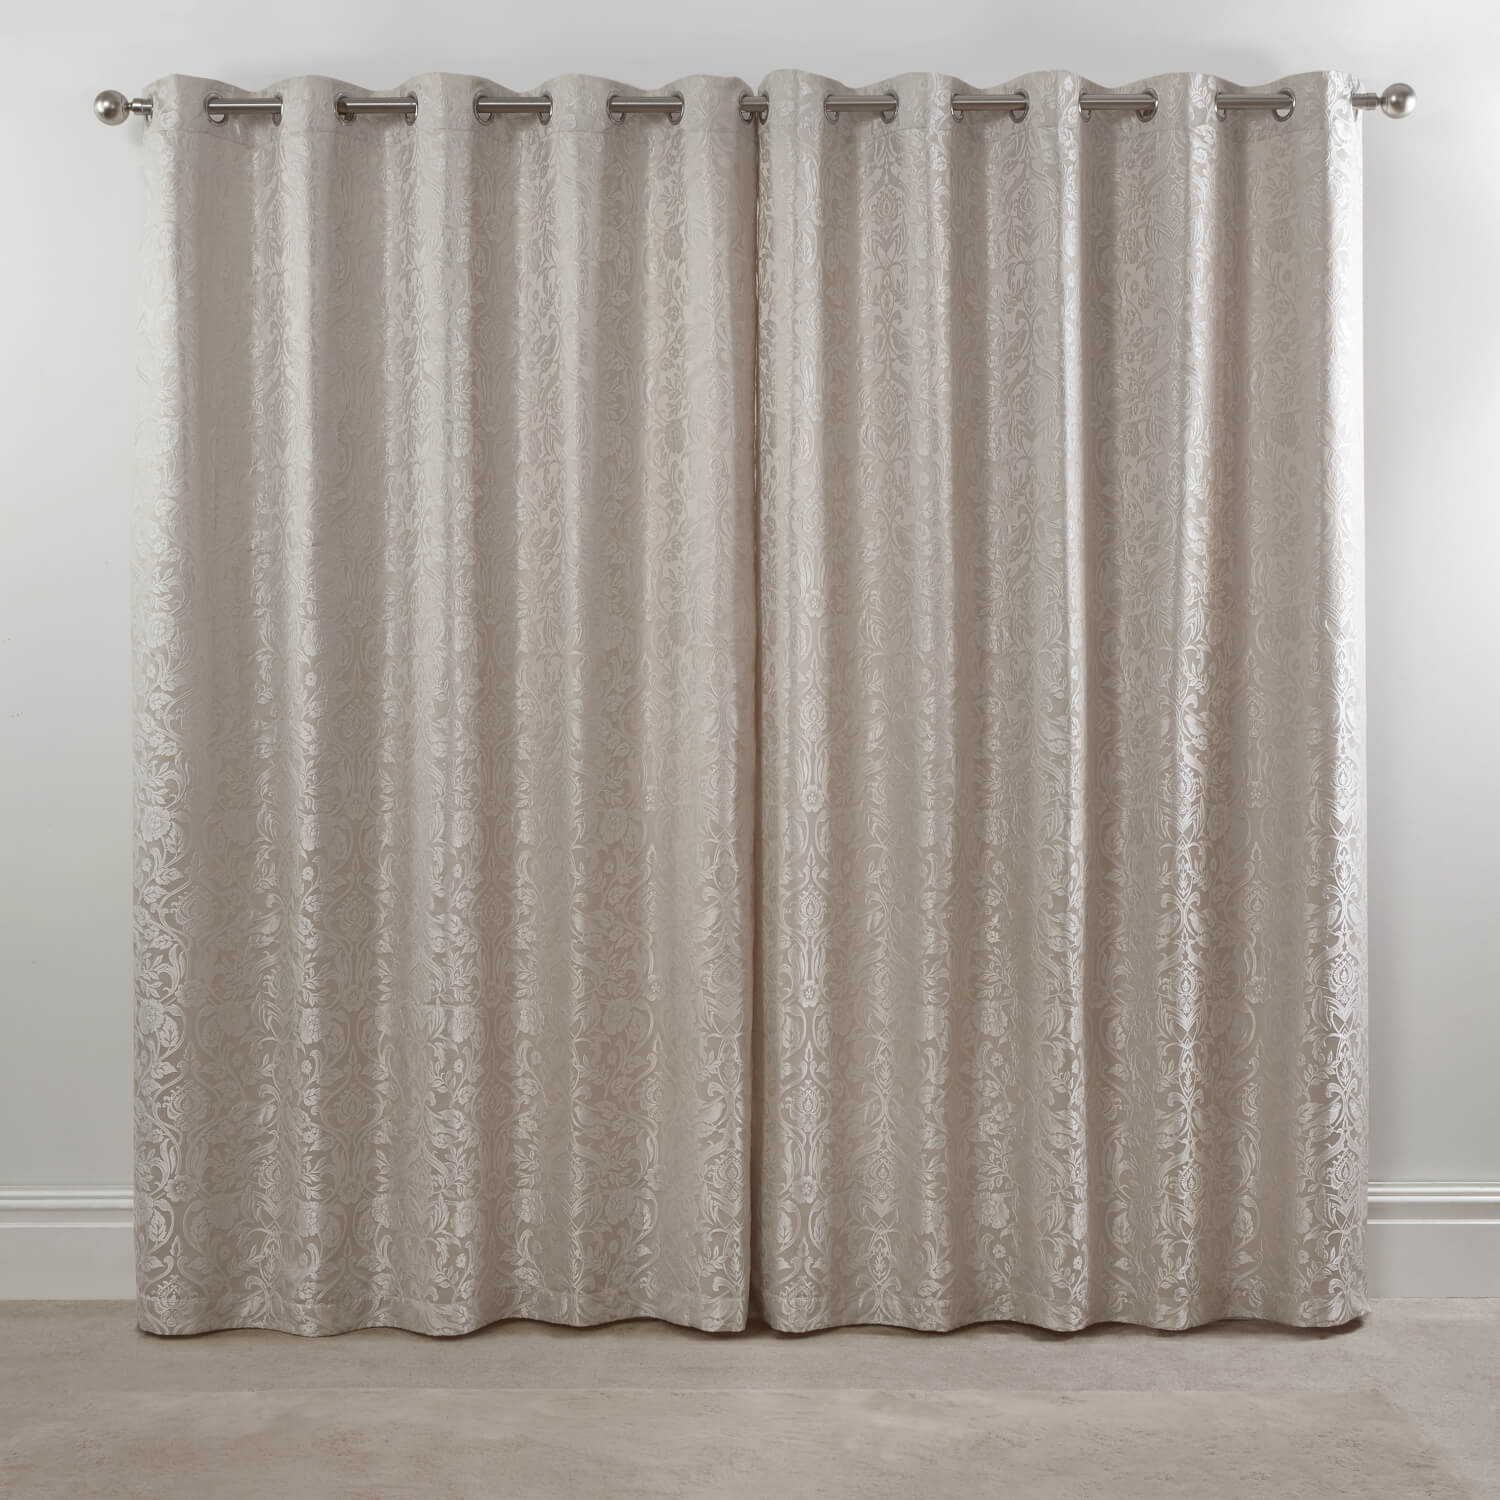 Maison By Emma Barclay Lined Eyelet Jacquard Curtains - Cream 3 Shaws Department Stores